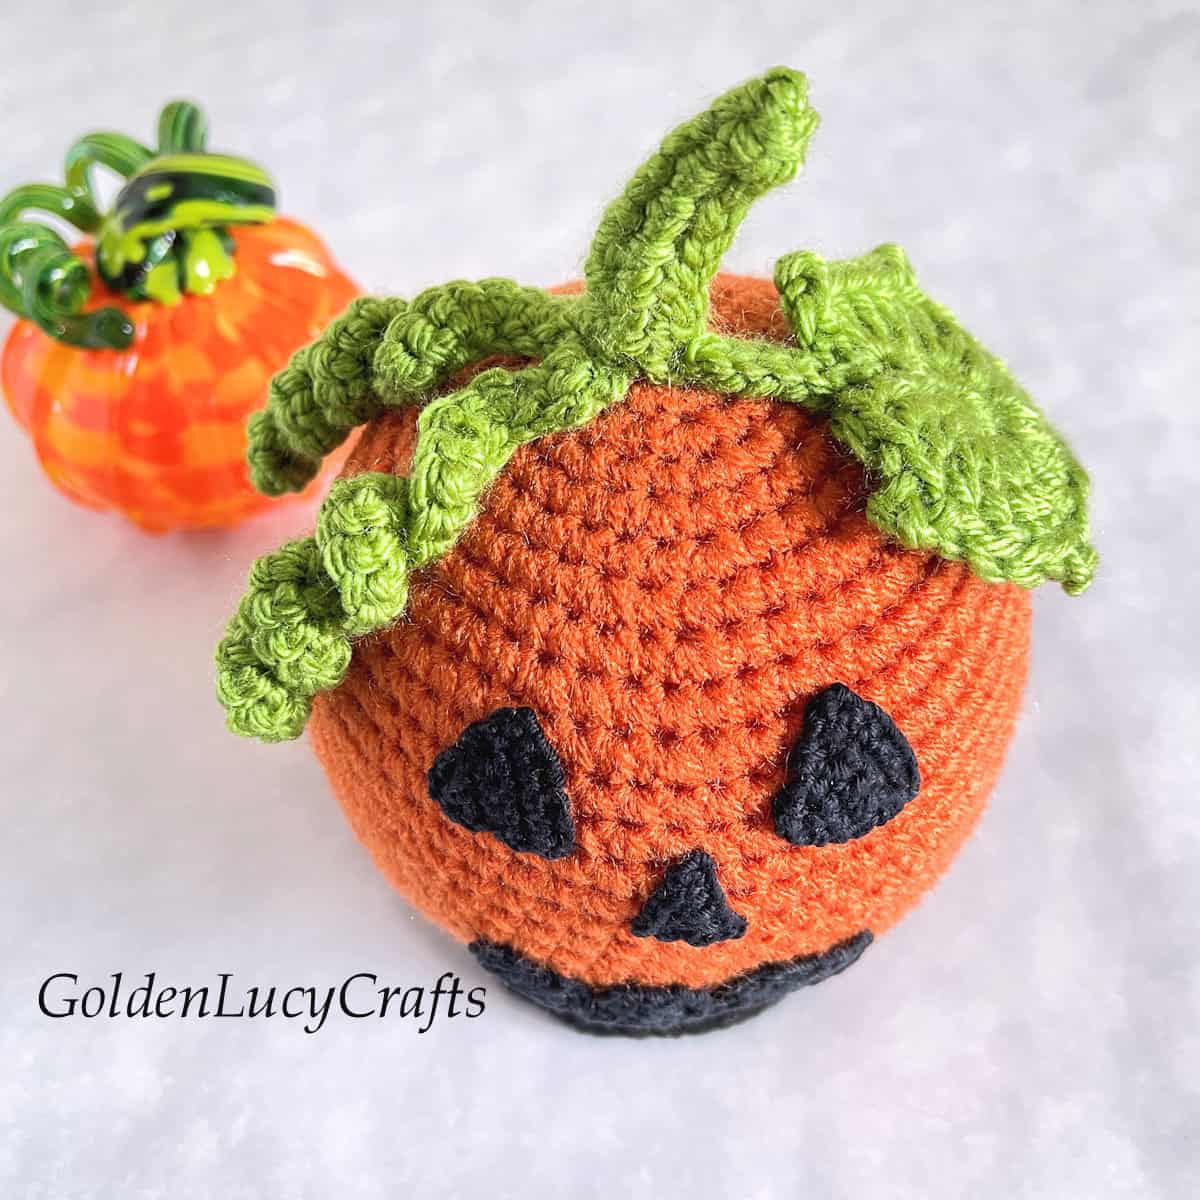 Crochet Halloween pumpking snow globe, view from the above.